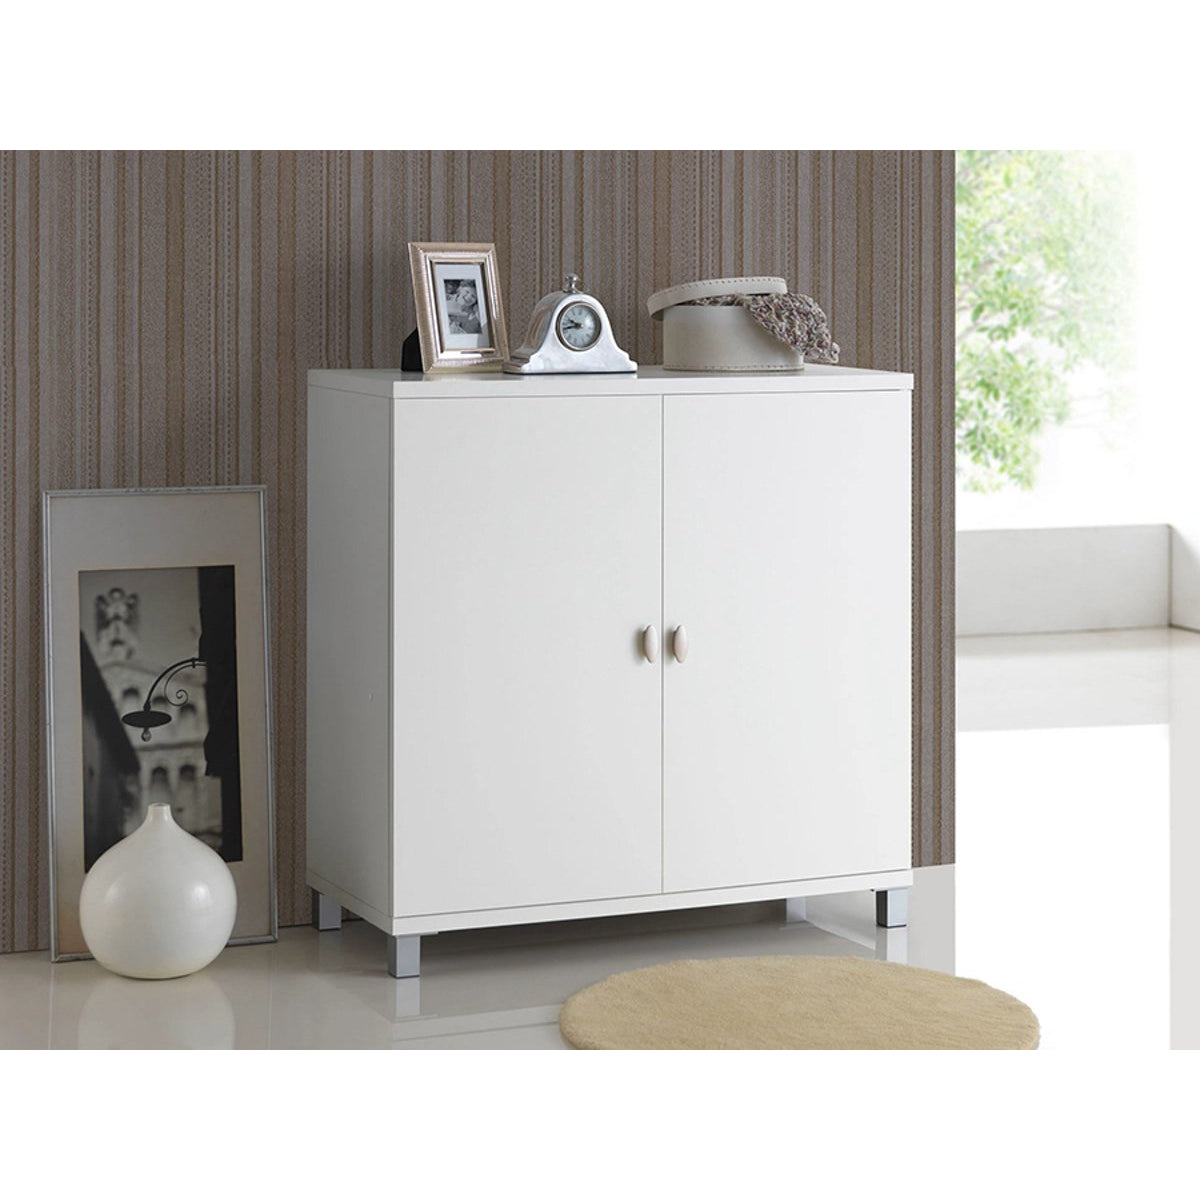 Baxton Studio Marcy Modern and Contemporary White Wood Entryway Handbags or School Bags Storage Sideboard Cabinet Baxton Studio--Minimal And Modern - 5